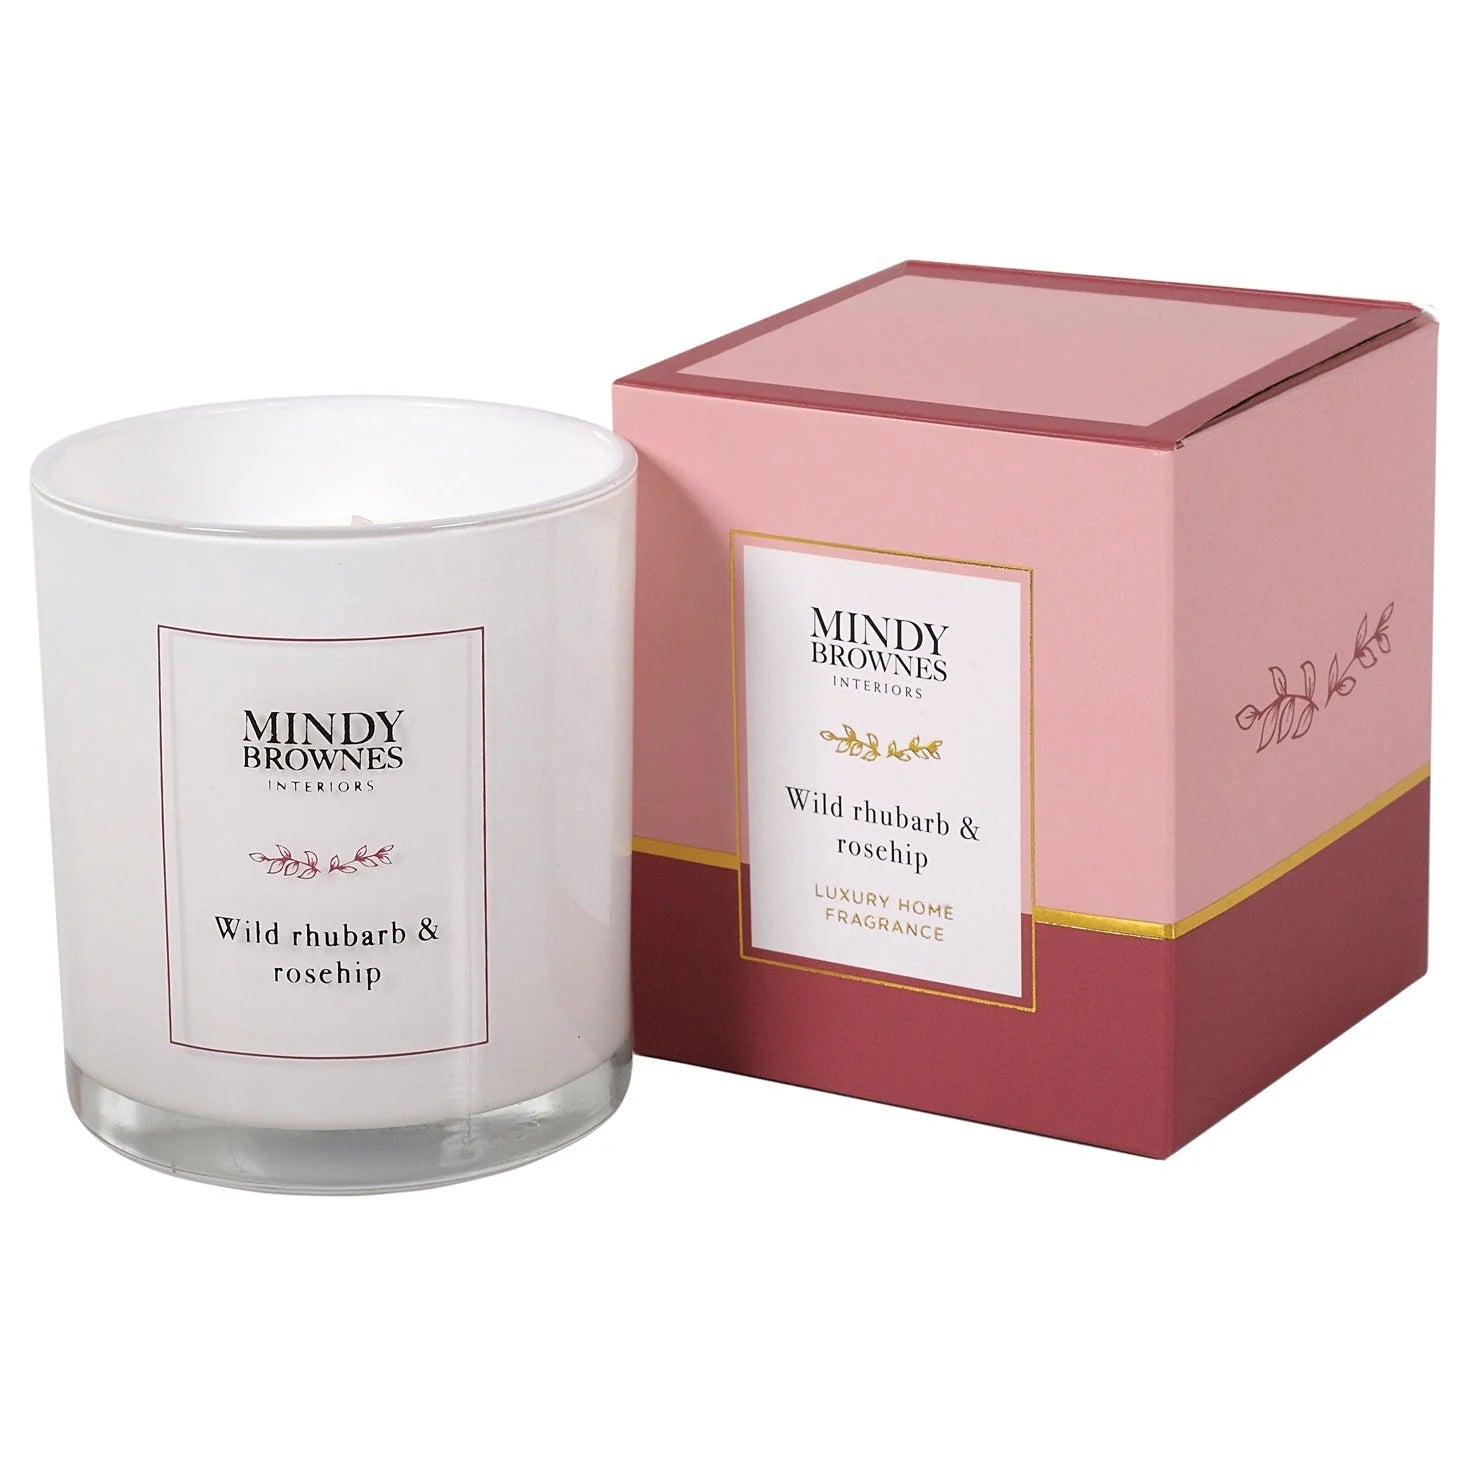 Mindy Brownes Scented Candles - Wild Rhubarb & Rosehip